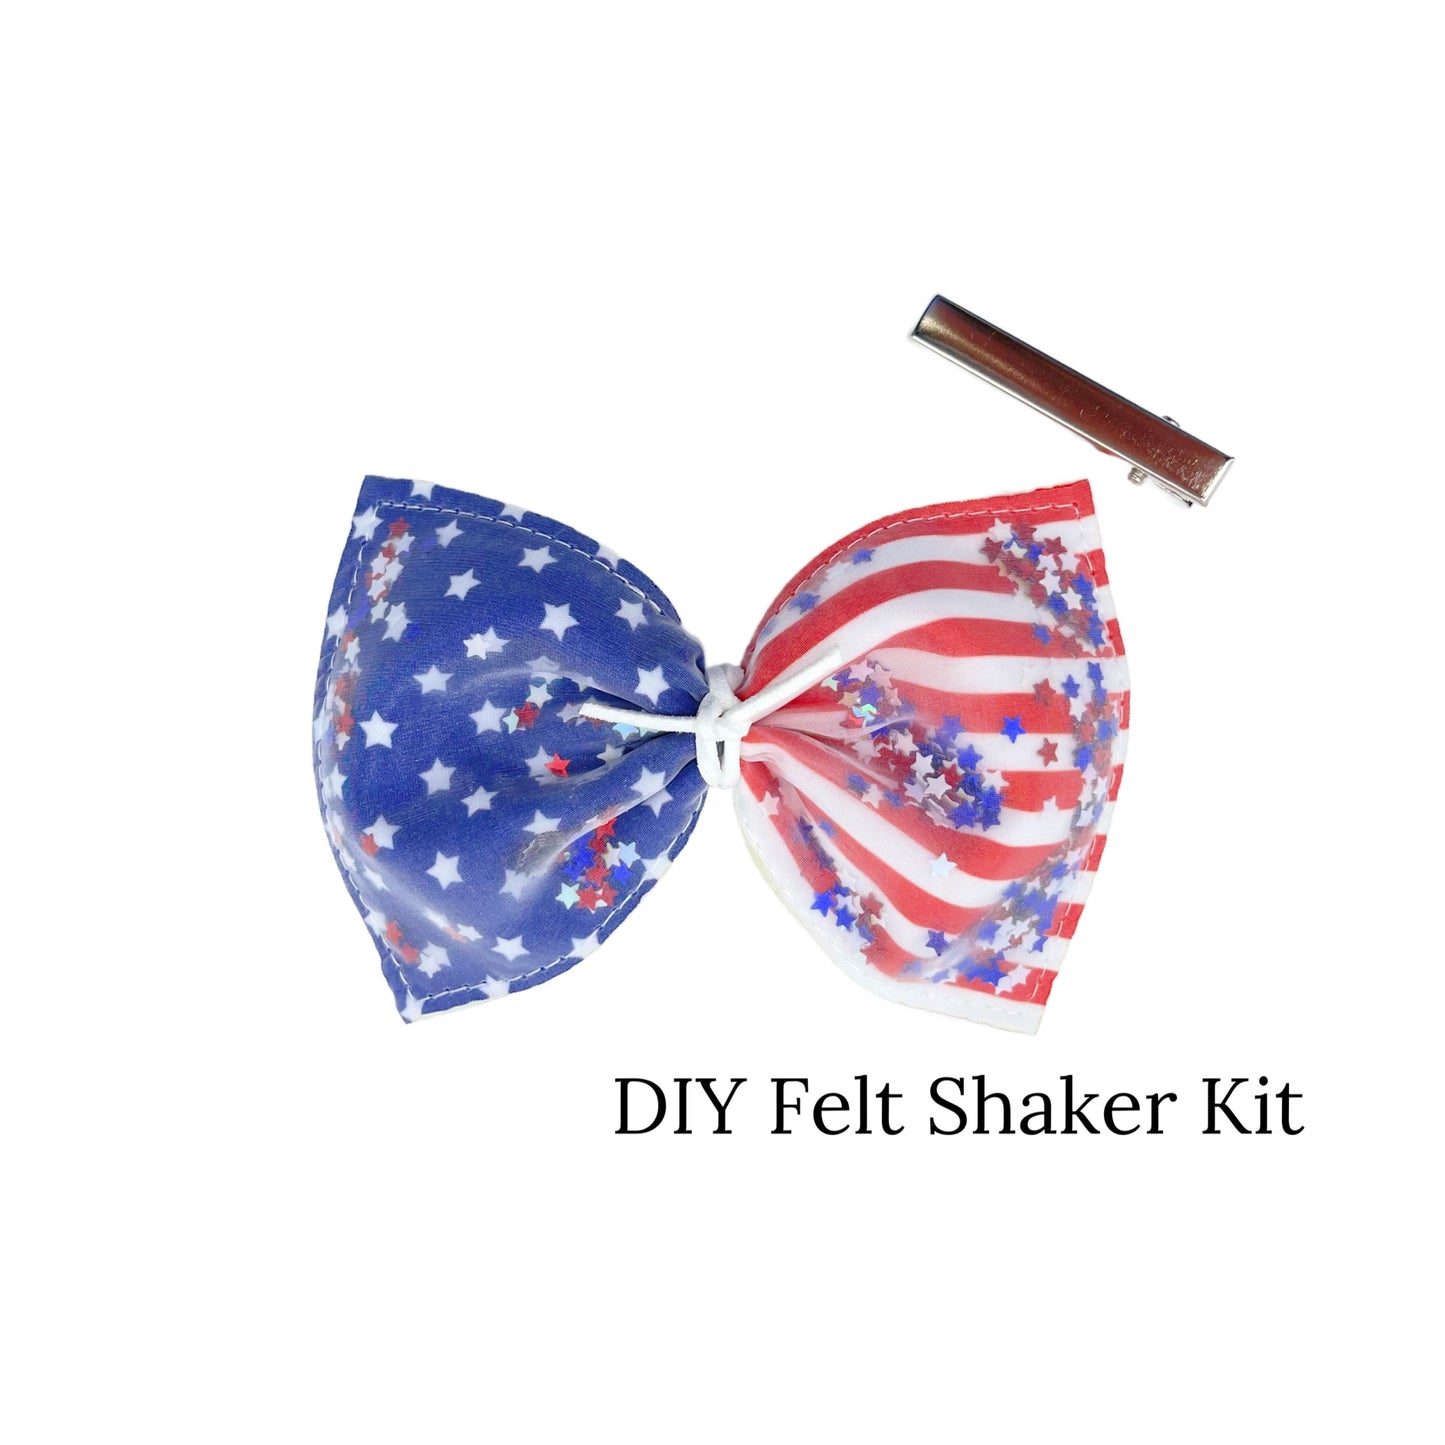 These American Flag shaker bows have three layers which consist of felt, satin and organza fabrics. Bows have a stiffer felt in the back to hold their shape. There is a tiny opening at the bottom of the felts where glitter and clay can be added to create a fun shaker bow.